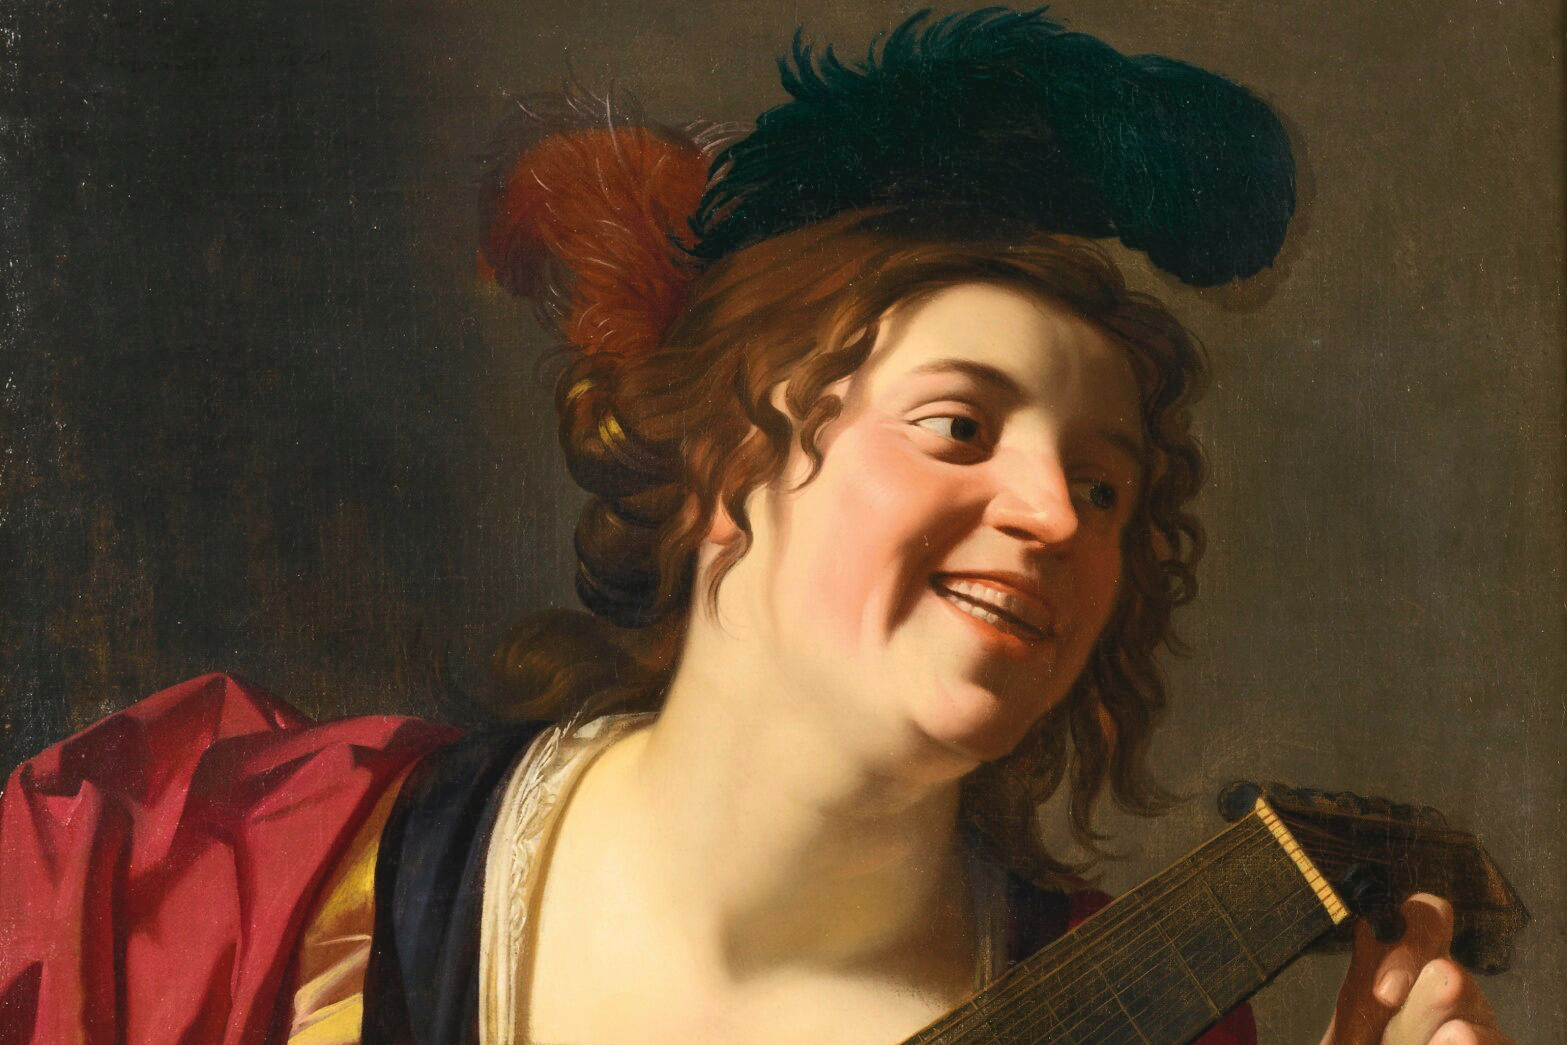 "A Woman Tuning a Lute", by Honthorst